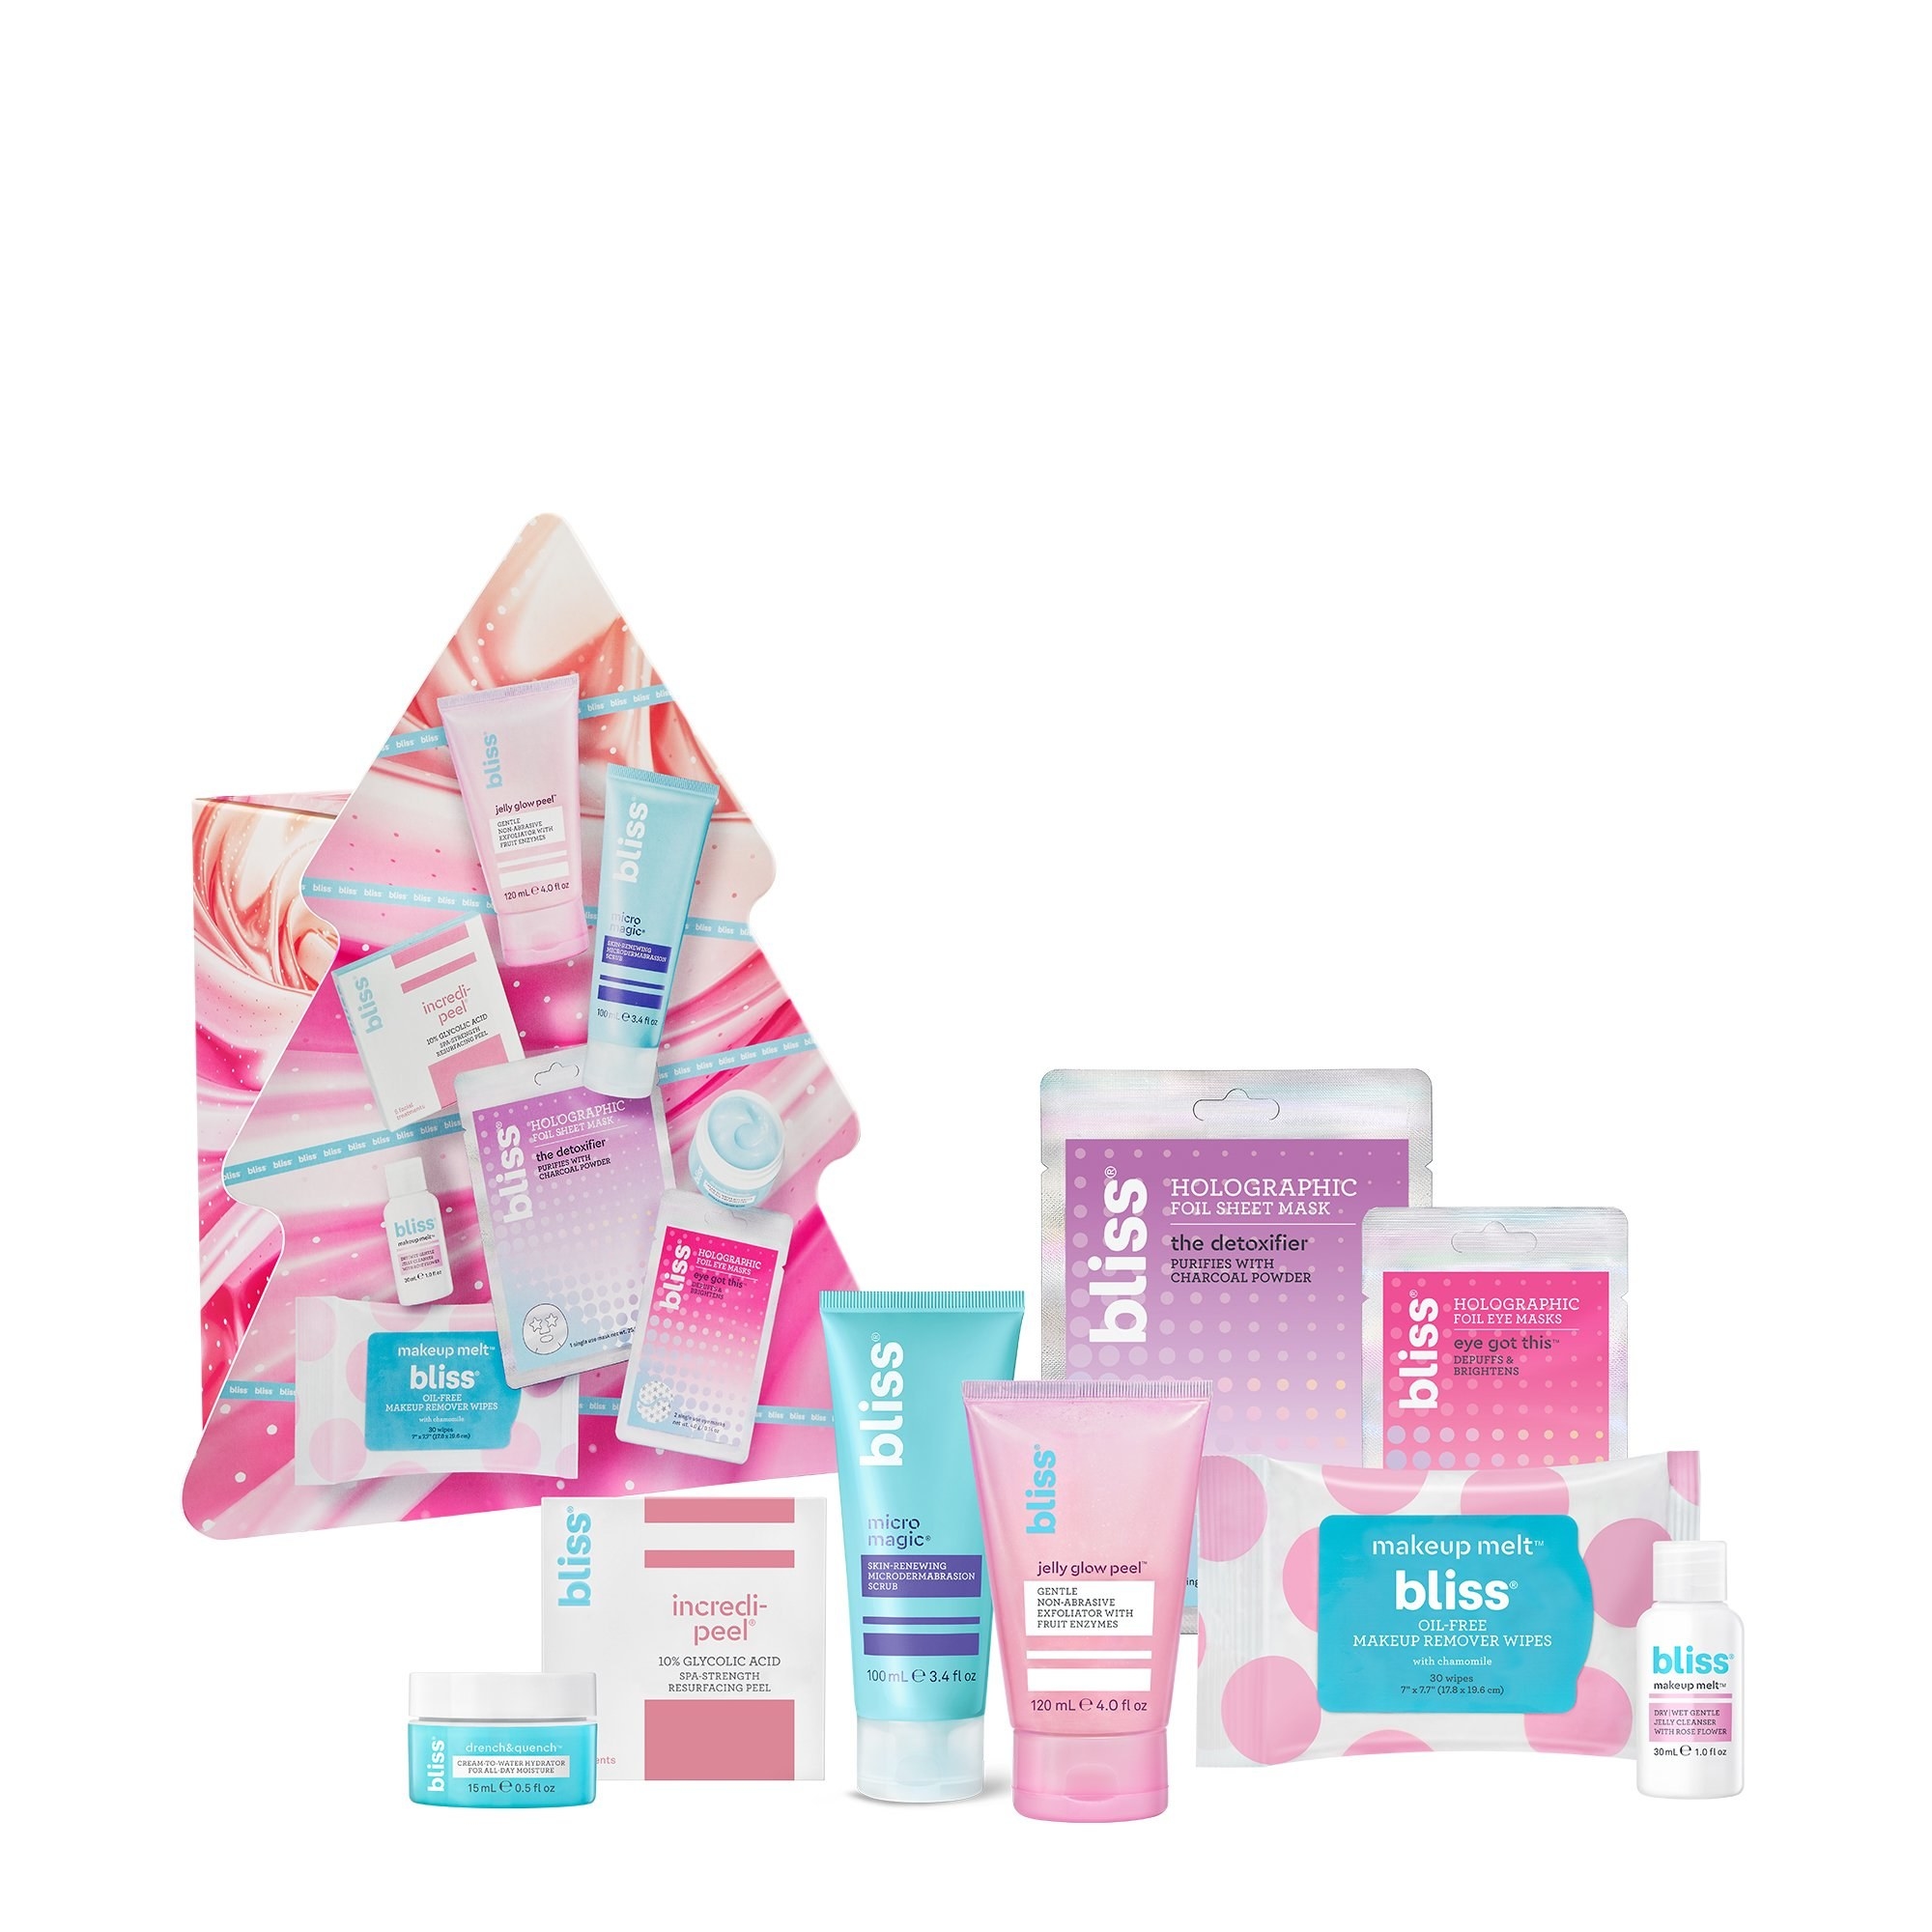 Eight Bliss skincare products that come in a Christmas-tree shaped set